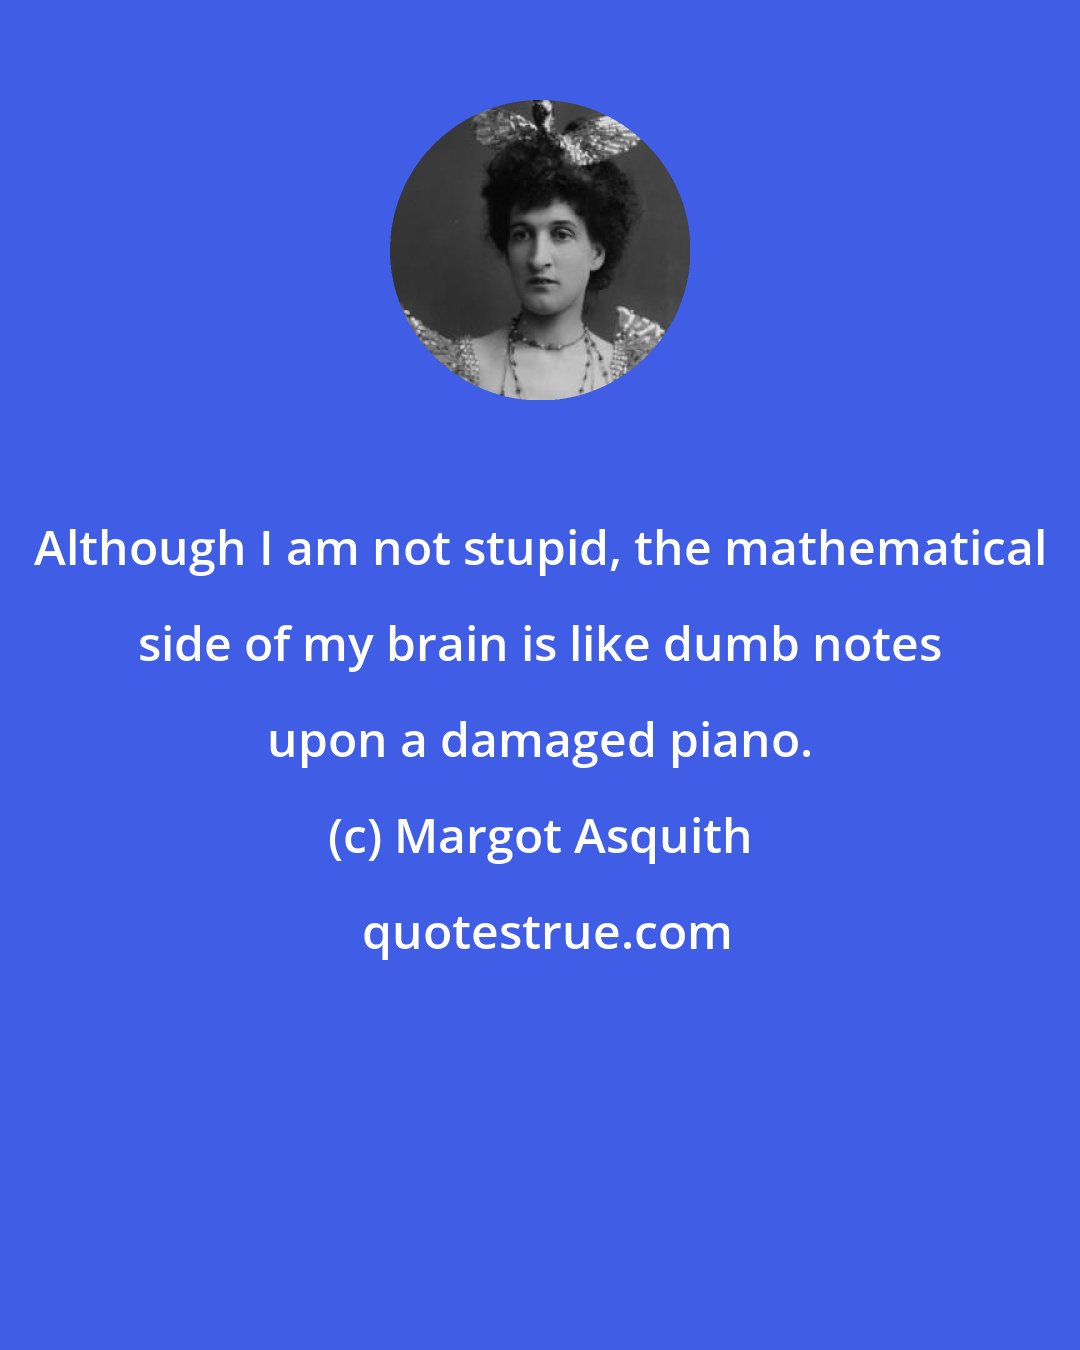 Margot Asquith: Although I am not stupid, the mathematical side of my brain is like dumb notes upon a damaged piano.